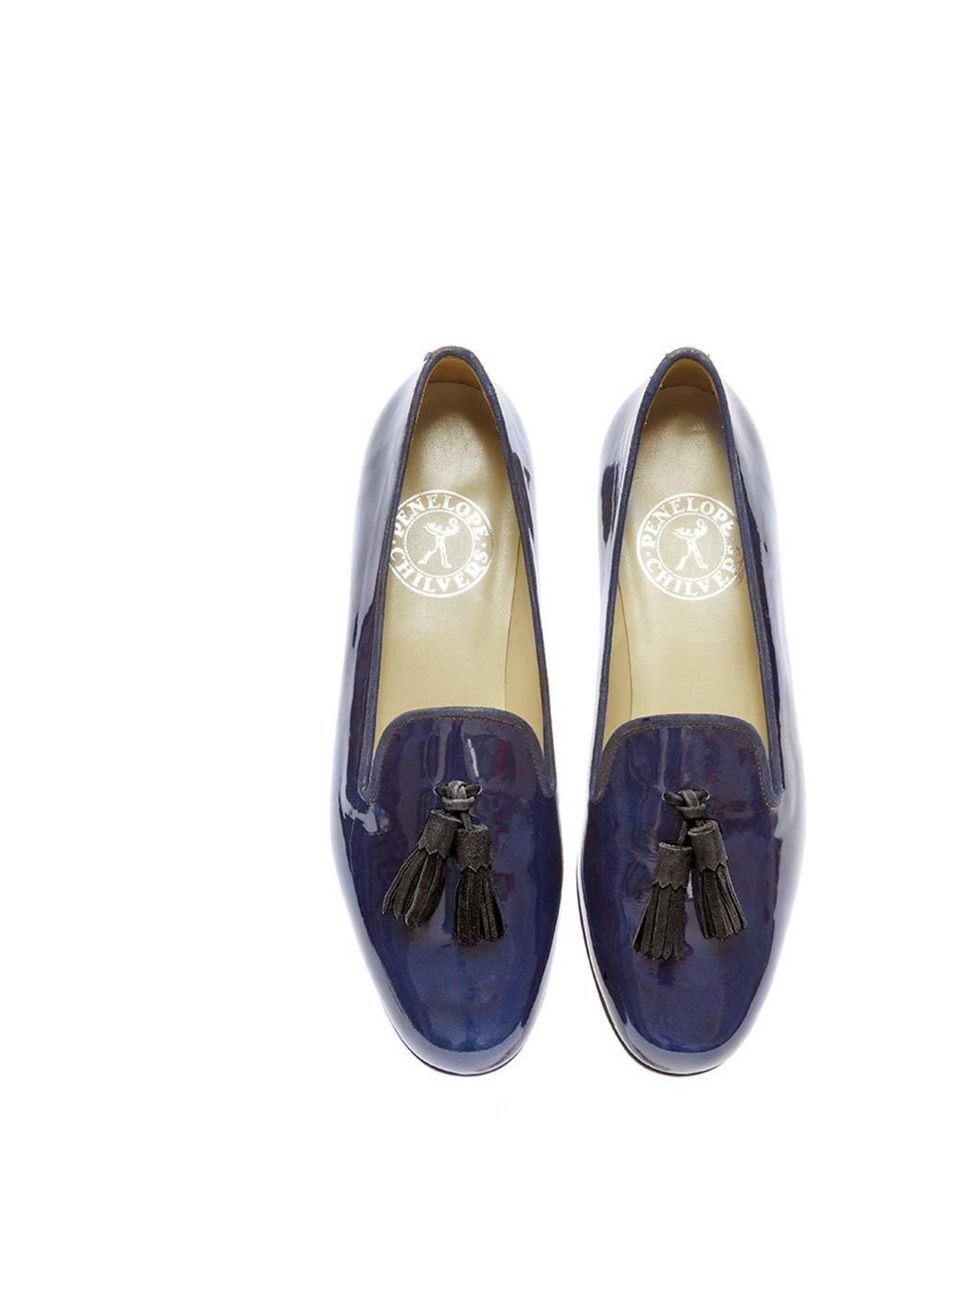 <p>Embrace the season of the flat shoe in these slick navy patent loafers; try them with a slightly cropped trouser for the office.</p><p><a href="http://www.penelopechilvers.com/products/details/i/1038-02040/n/dandy-tassel-slipper.aspx">Penelope Chilvers